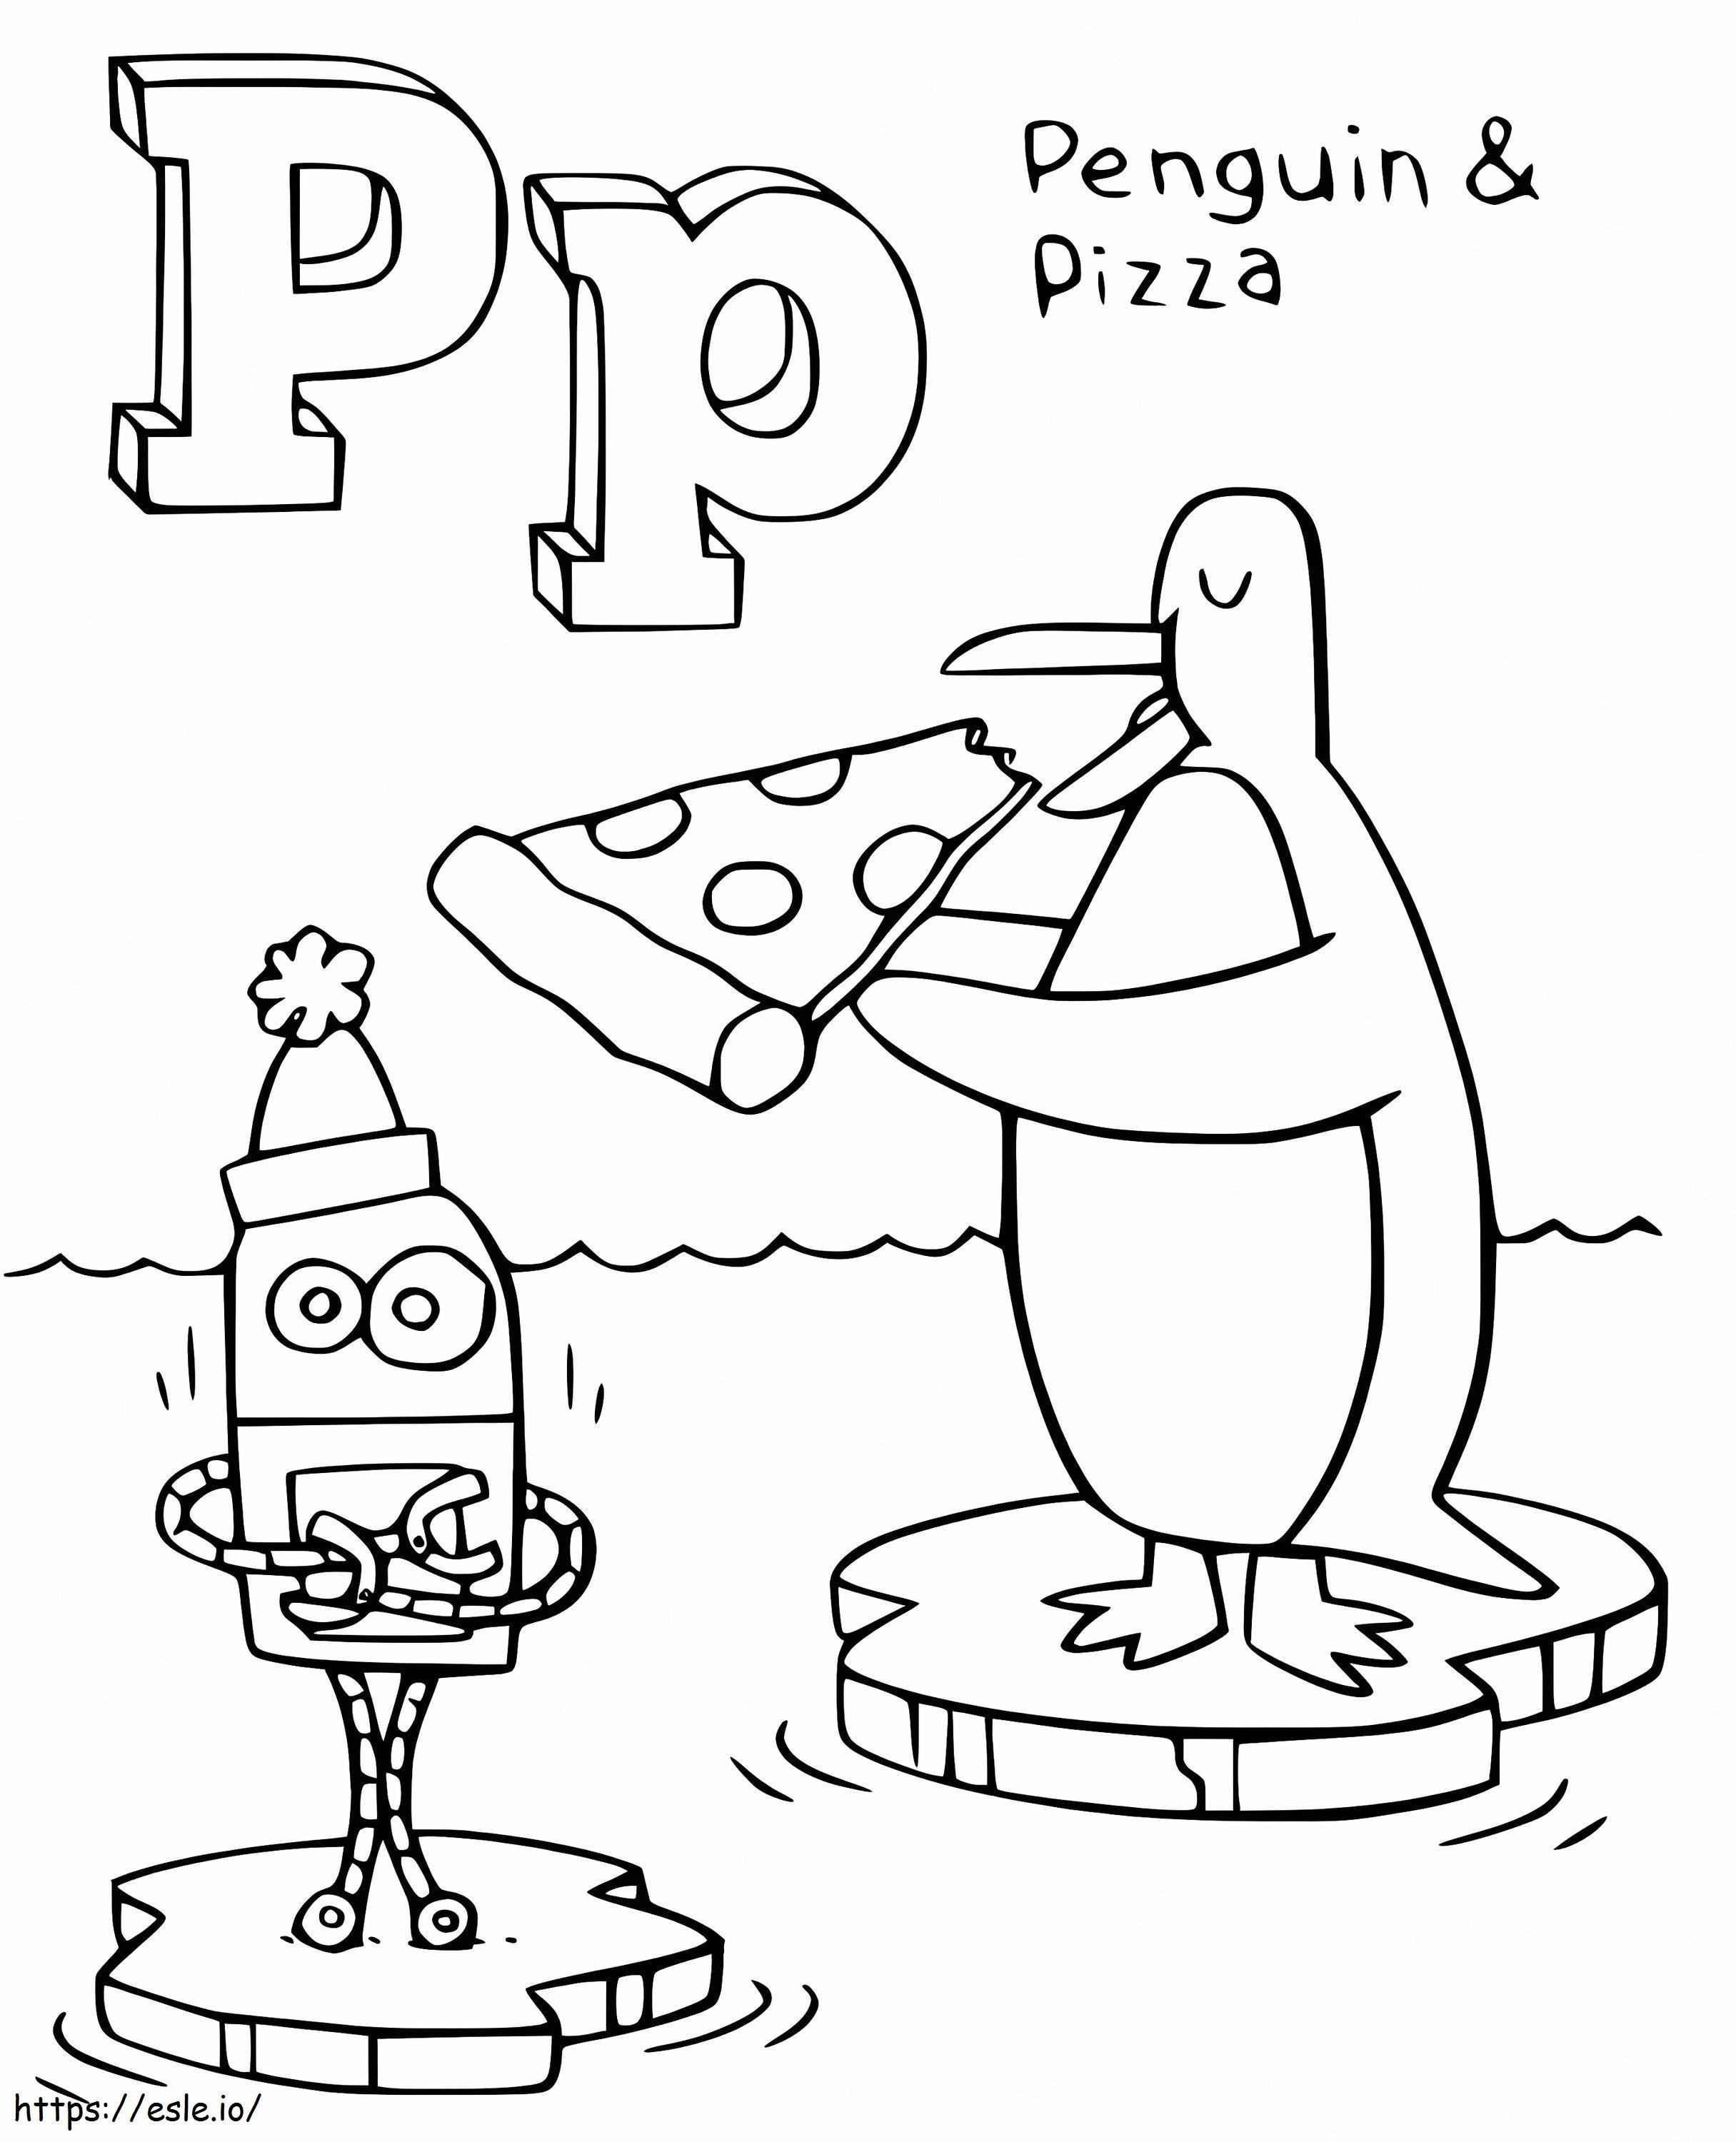 StoryBots Letter P coloring page